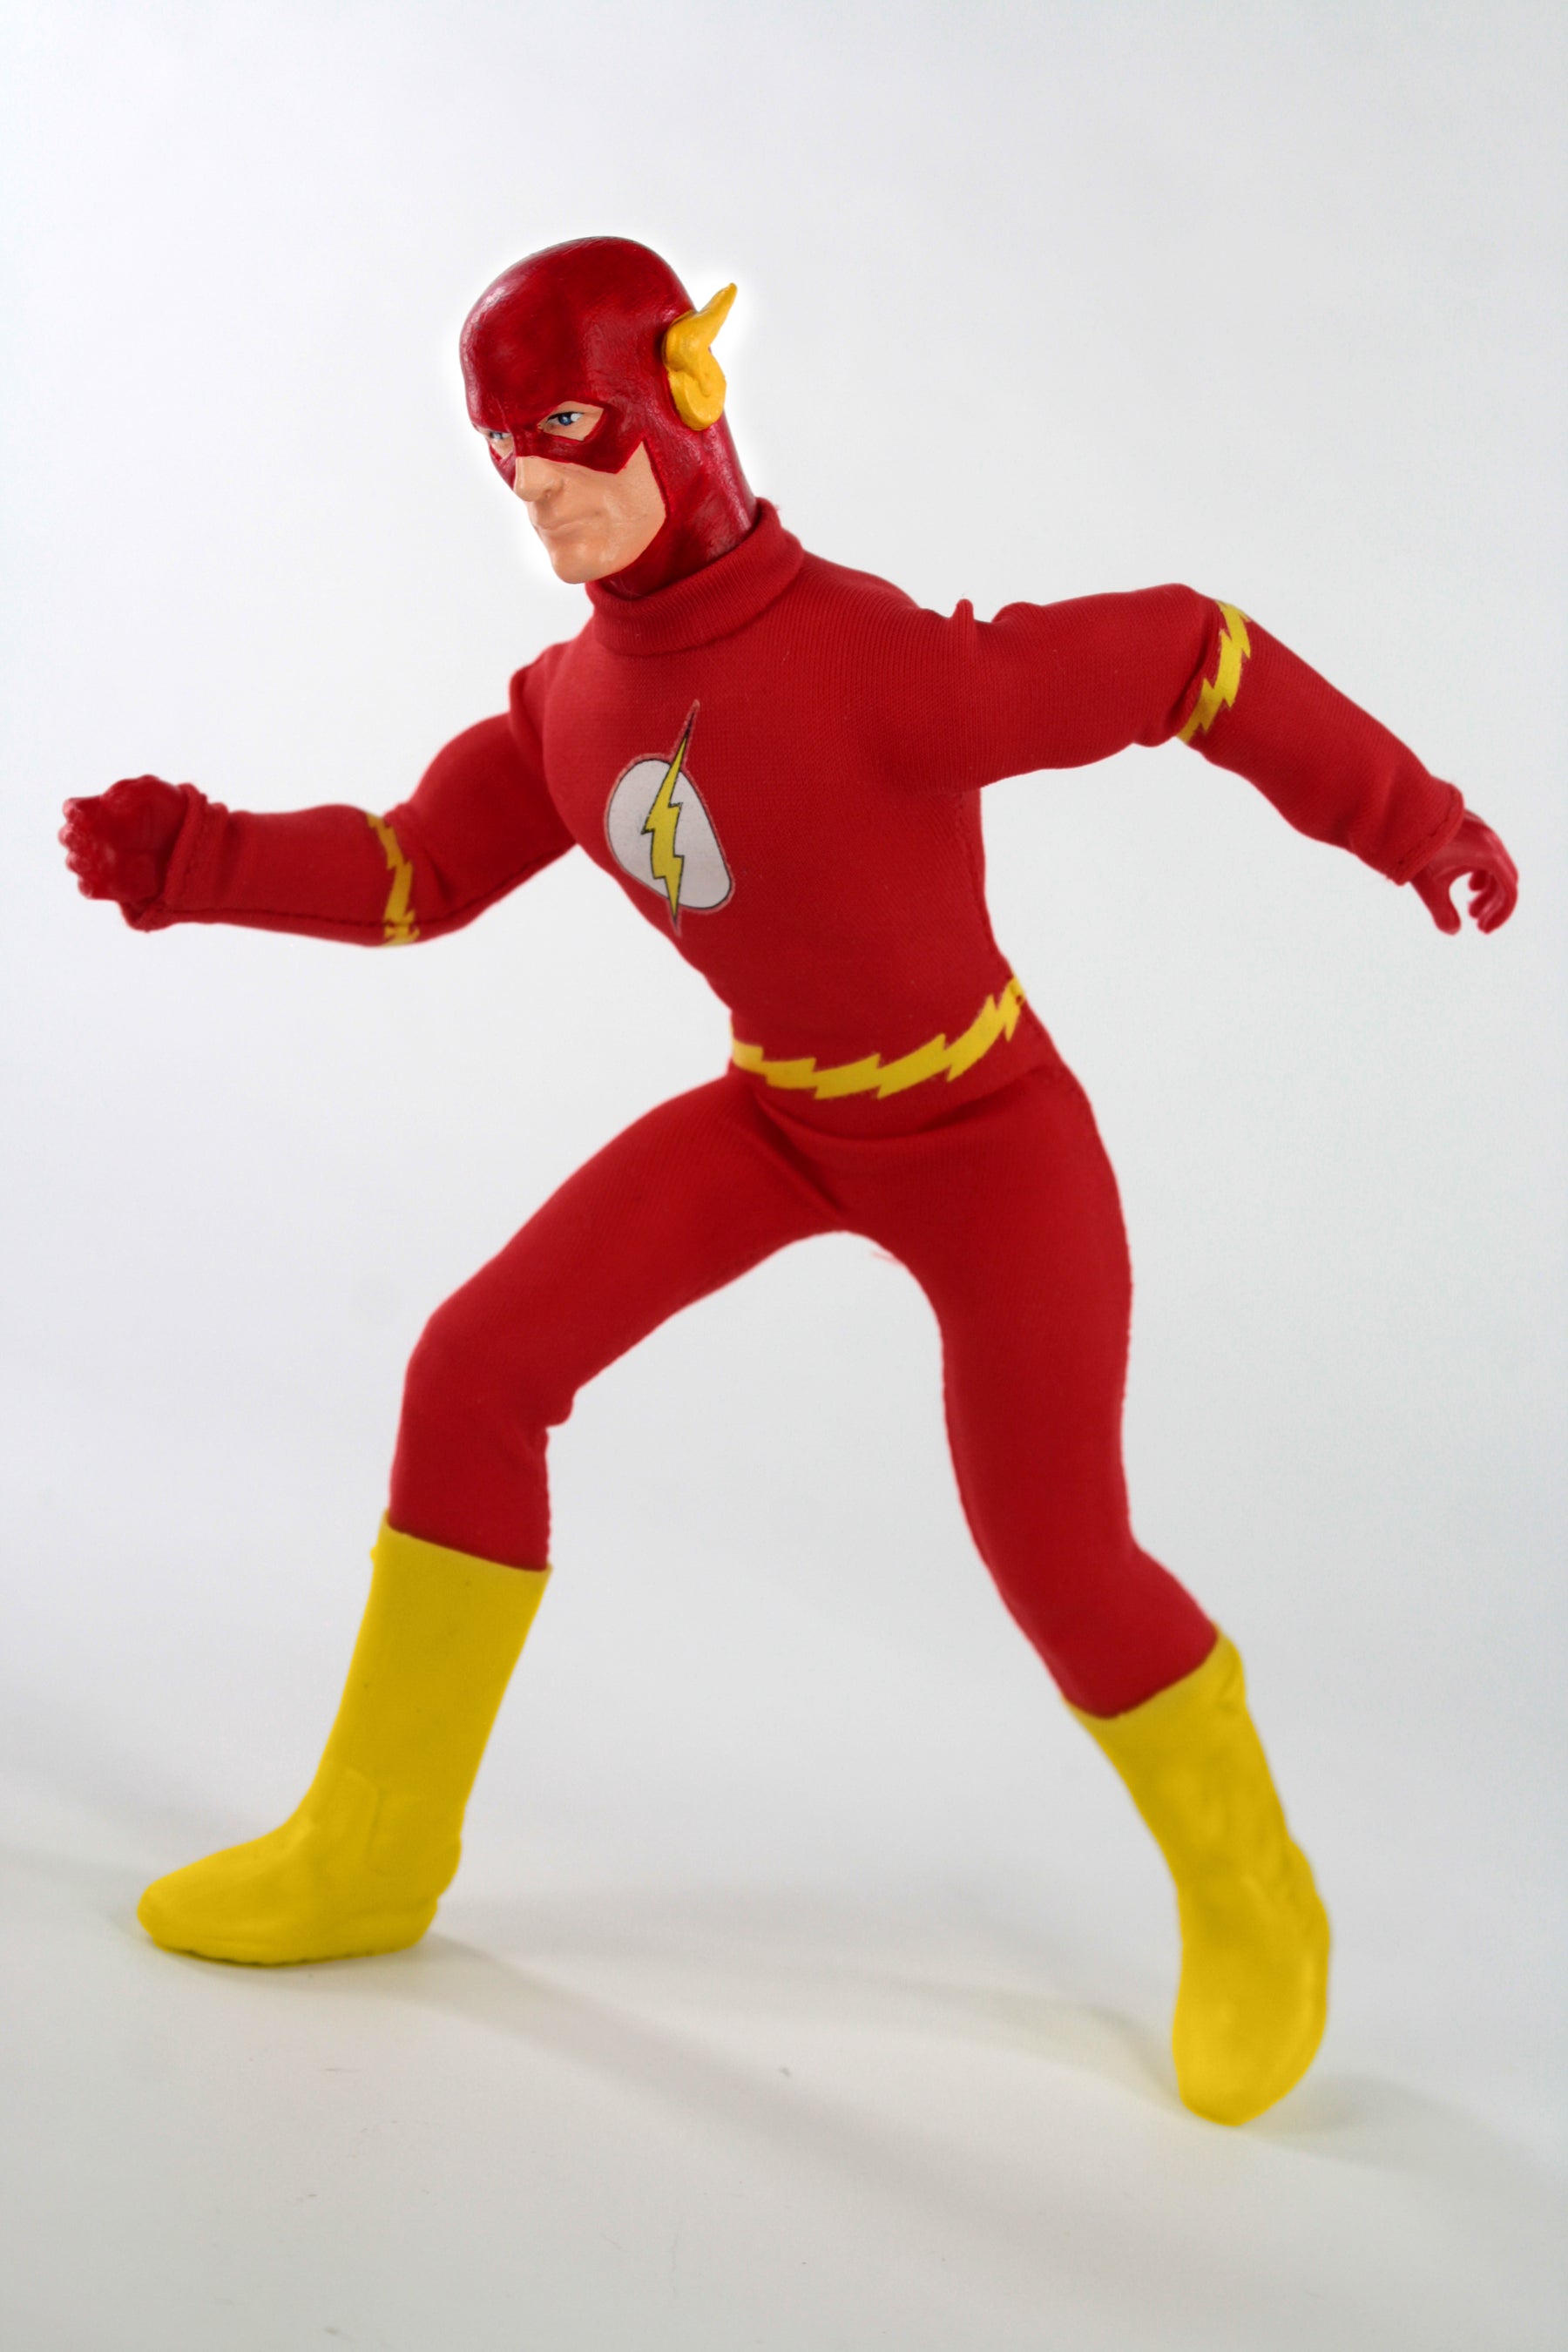 Mego Wave 16 - The Flash 50th Anniversary World's Greatest Superheroes (Classic Box) 8" Action Figure